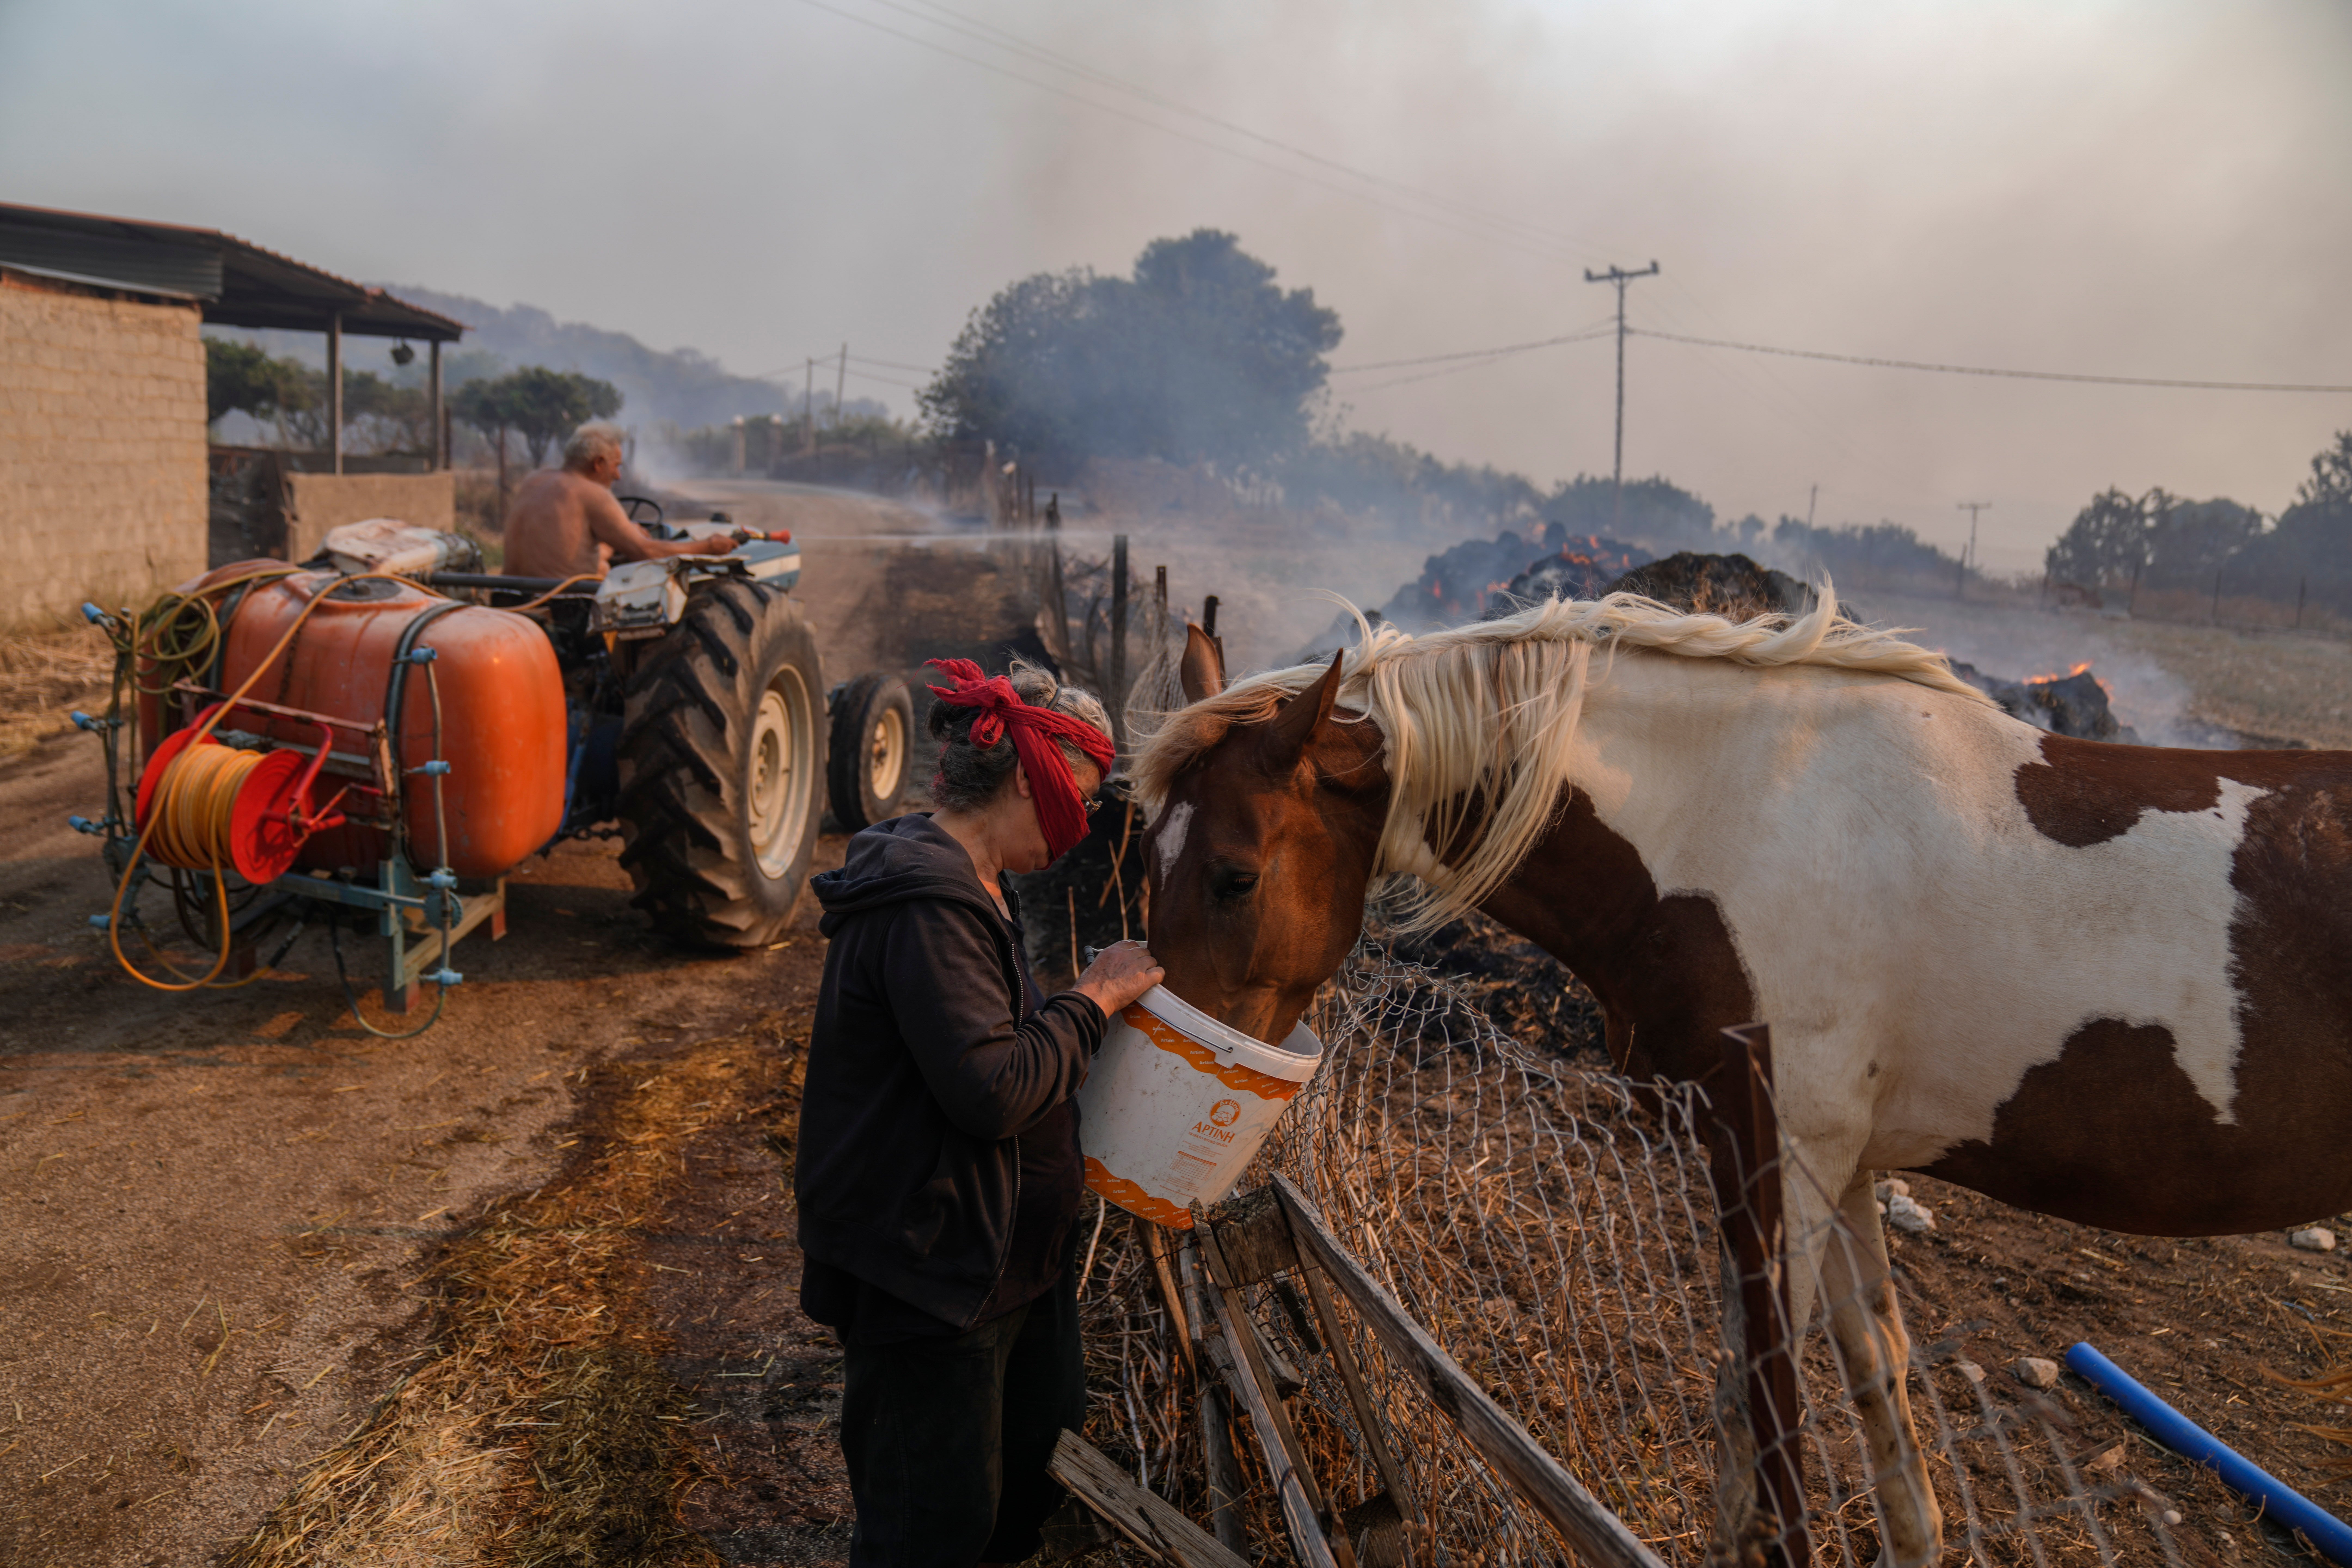 A woman gives water to her horse as her husband on a tractor tries to extinguish the fire with a hose near Loutraki